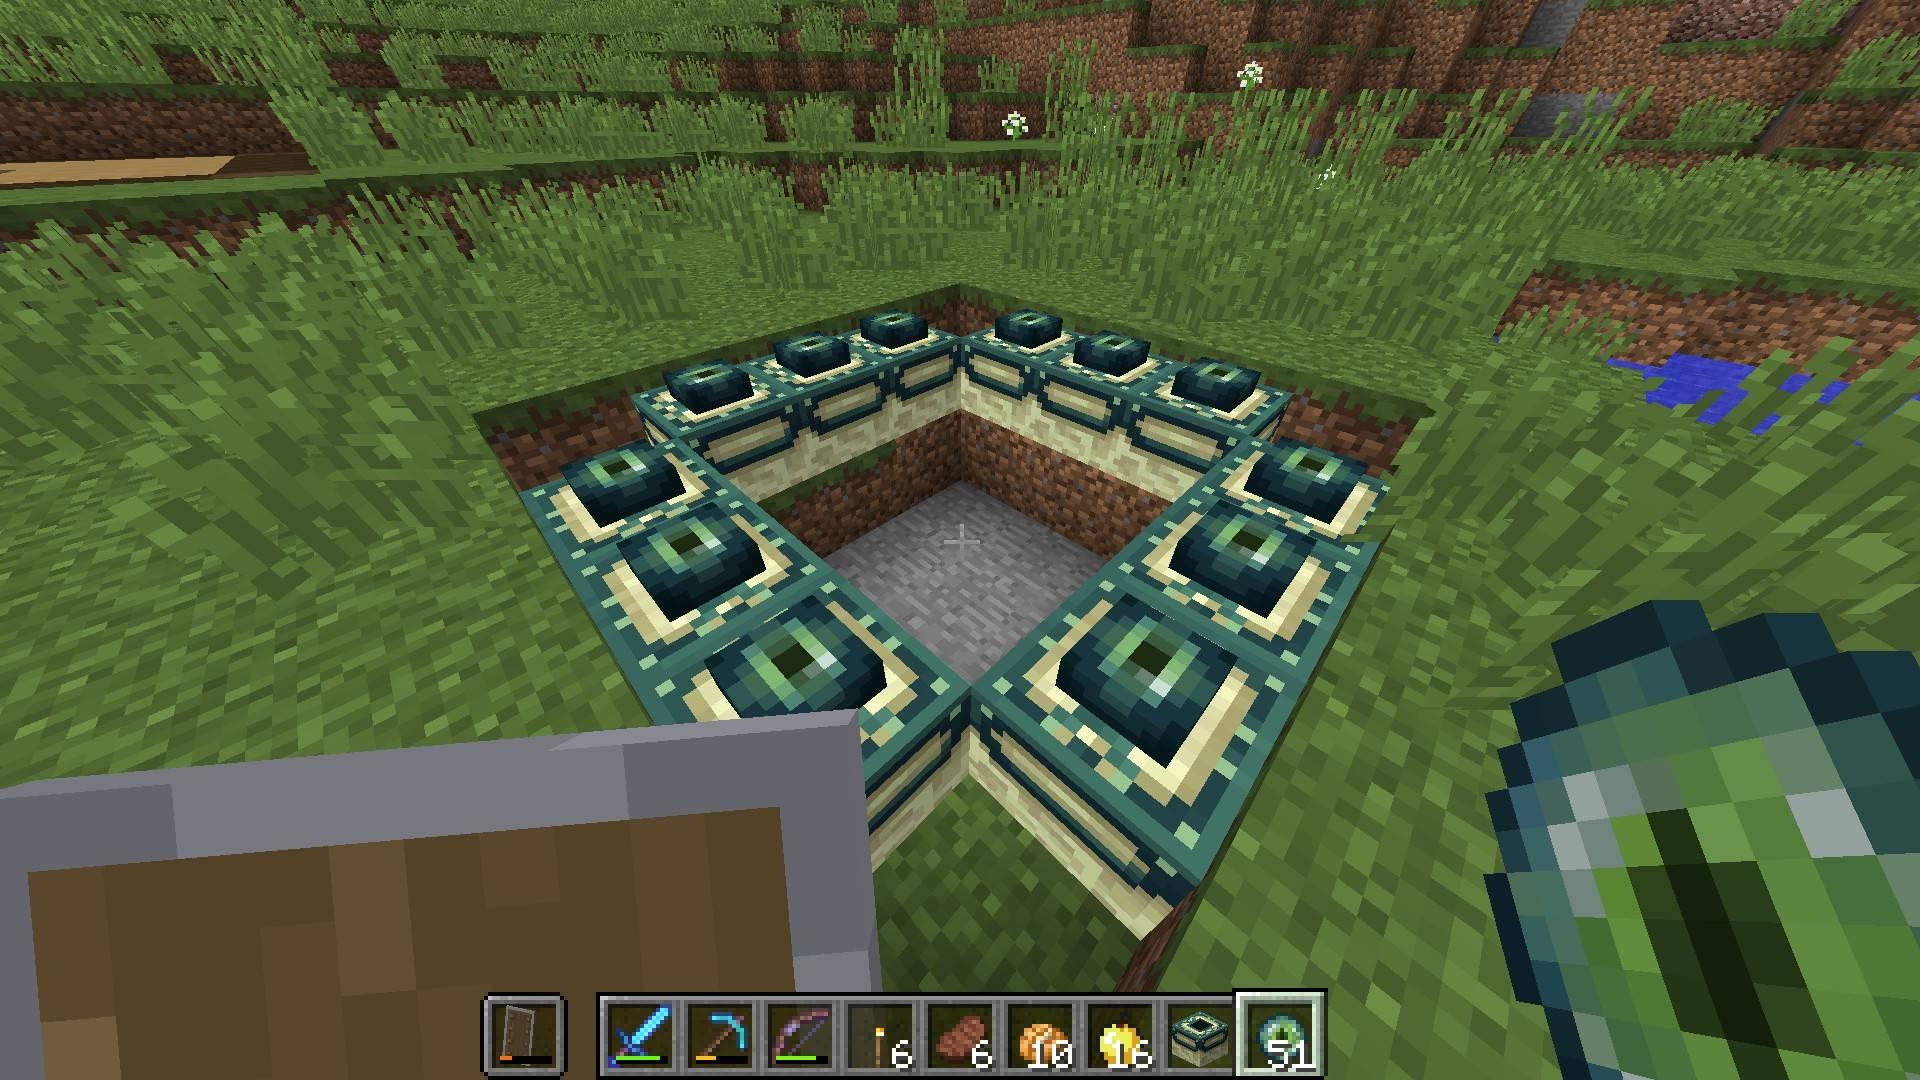 Minecraft end portal – how to find and build an end portal